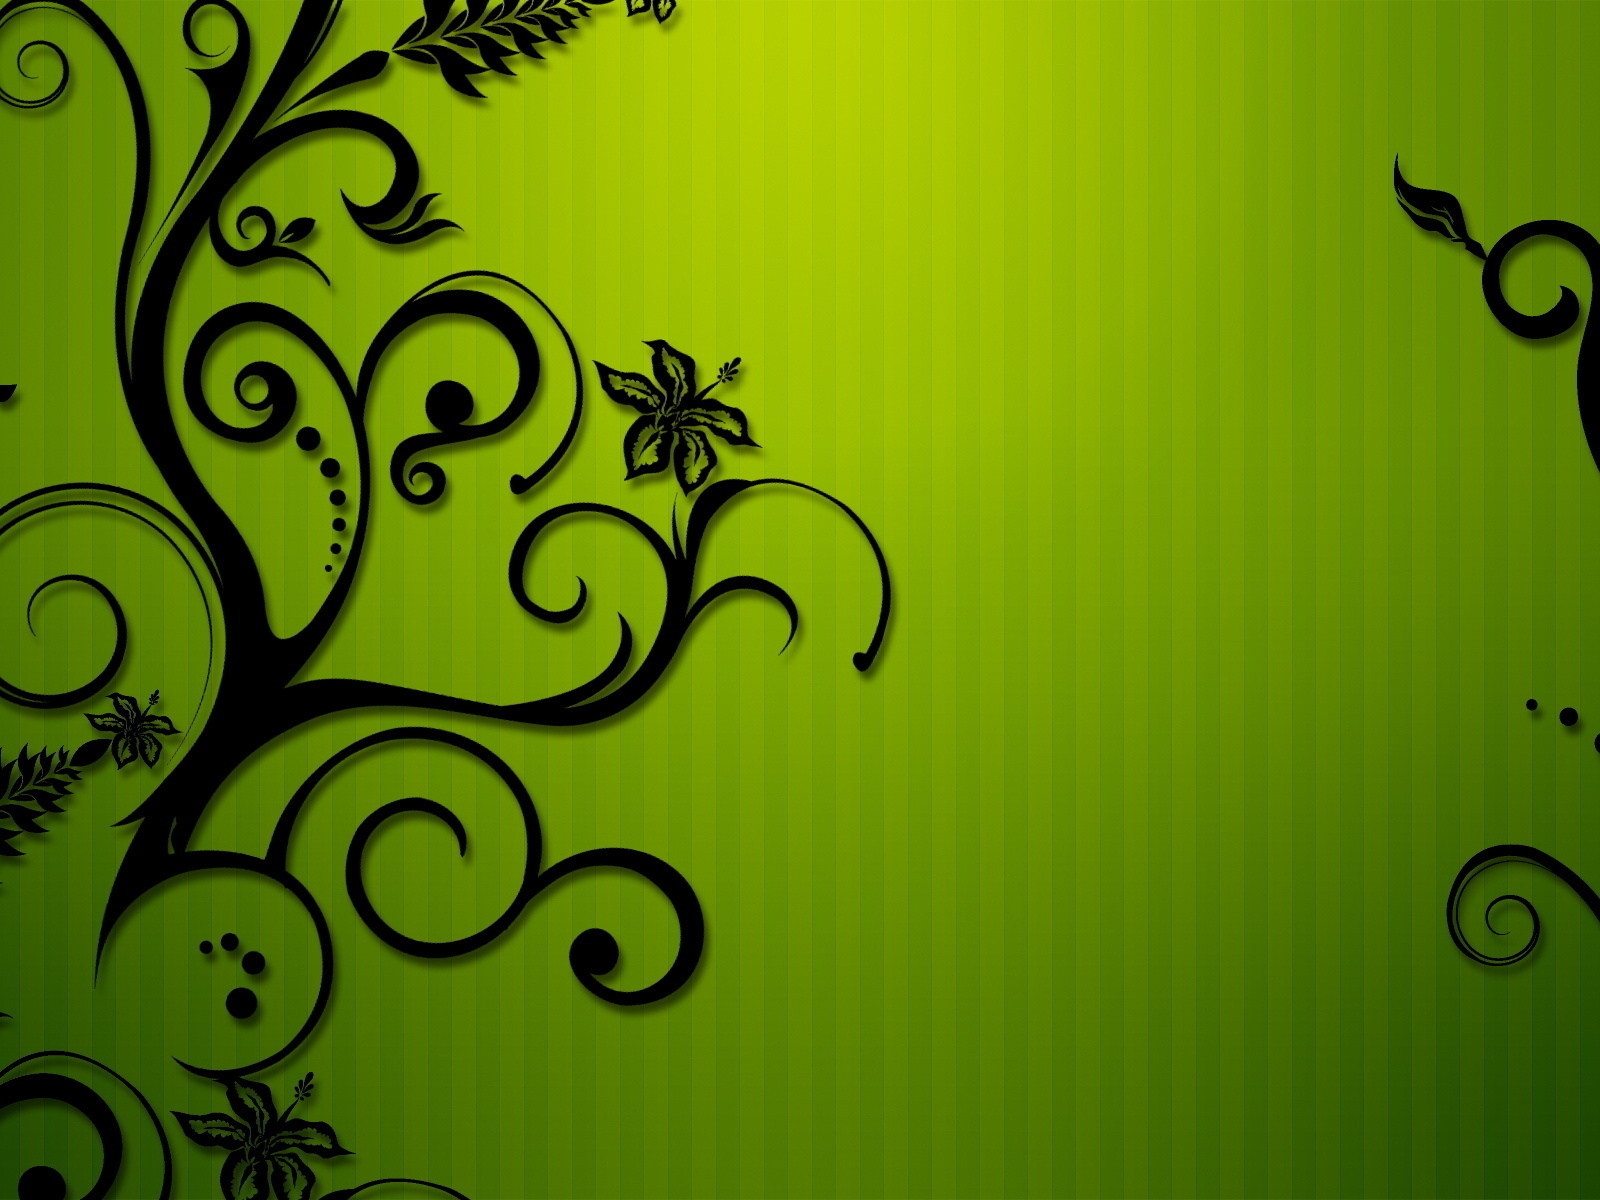 Floral Shapes for 1600 x 1200 resolution